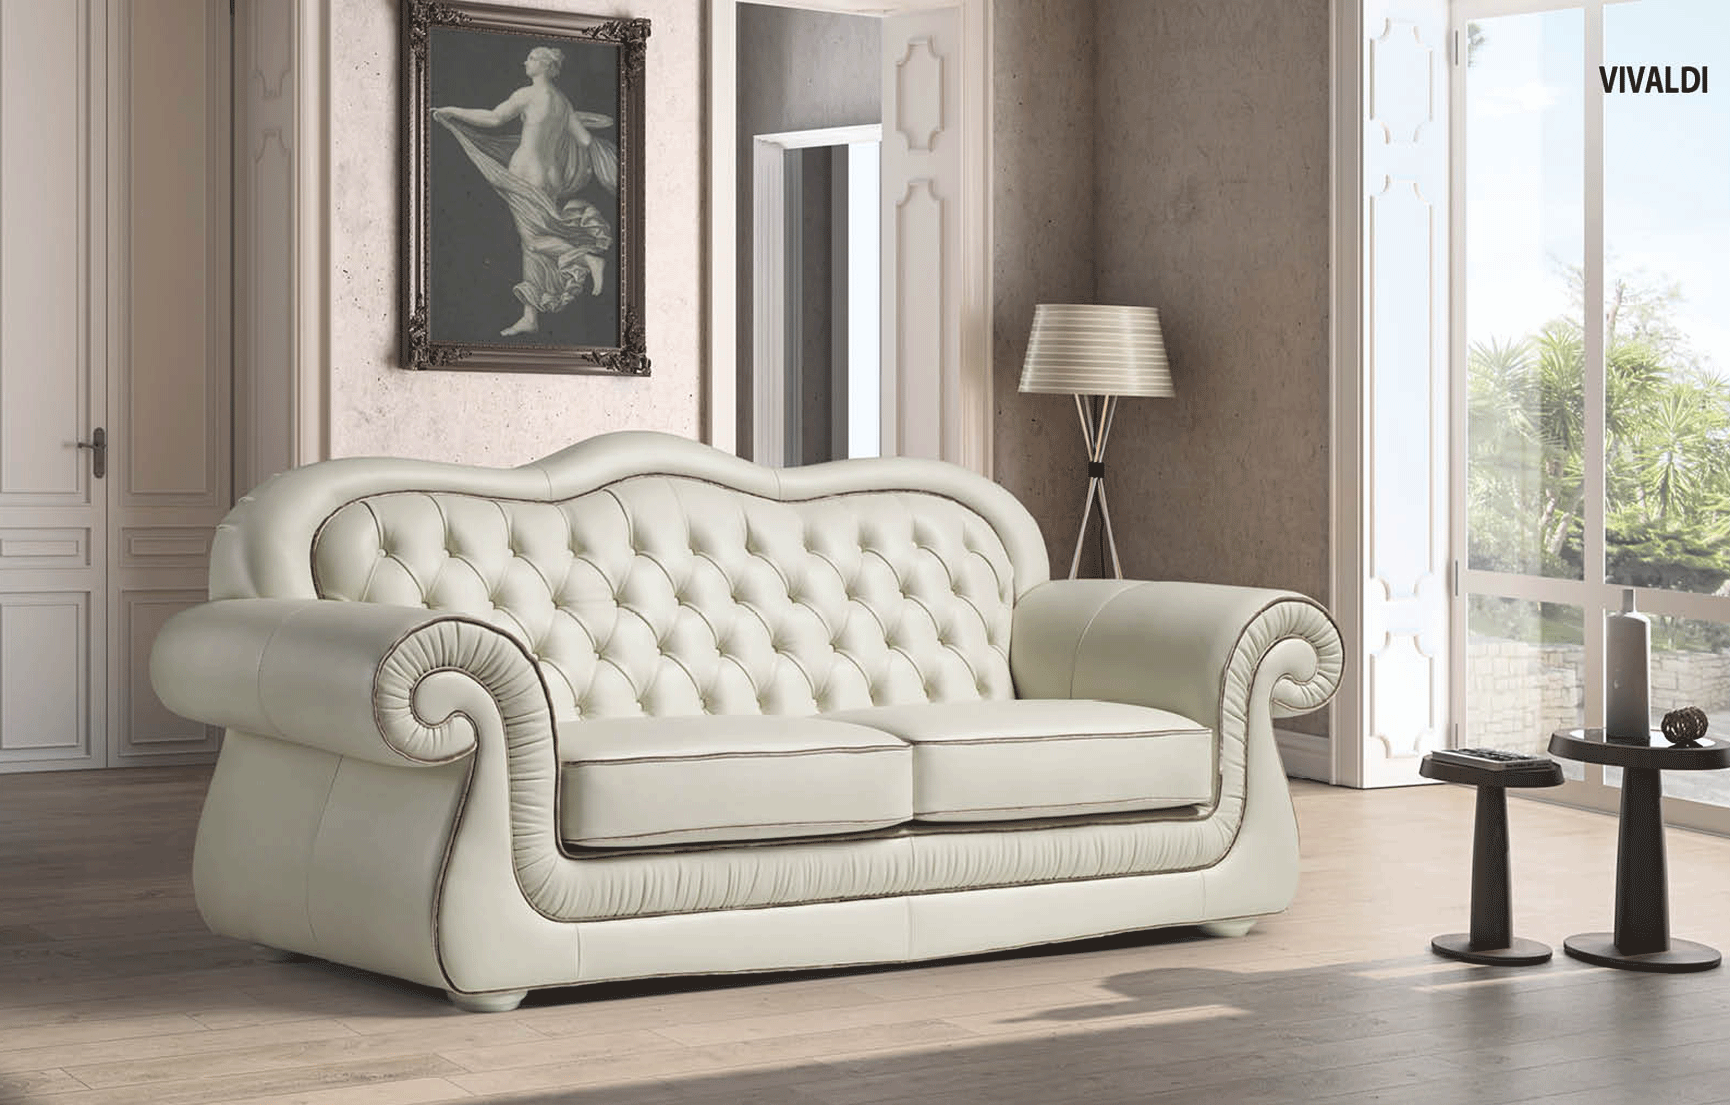 Living Room Furniture Sectionals with Sleepers Vivaldi